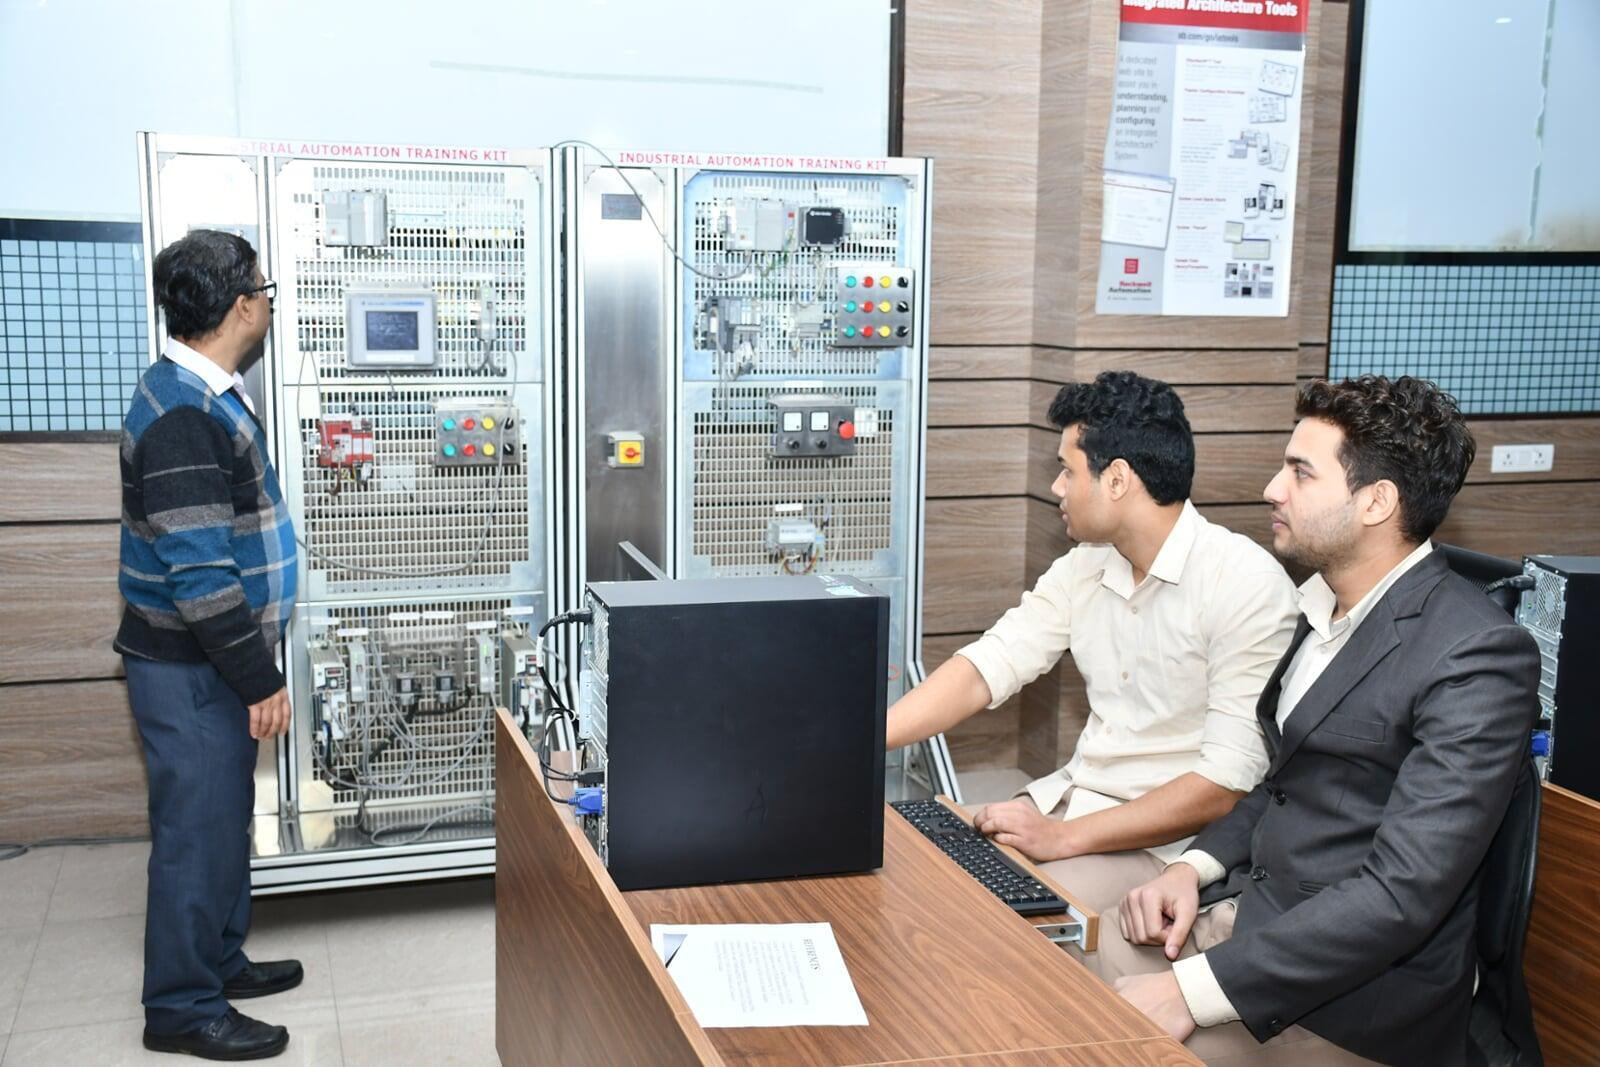 ITS Rockwell Automation Lab 1  with students